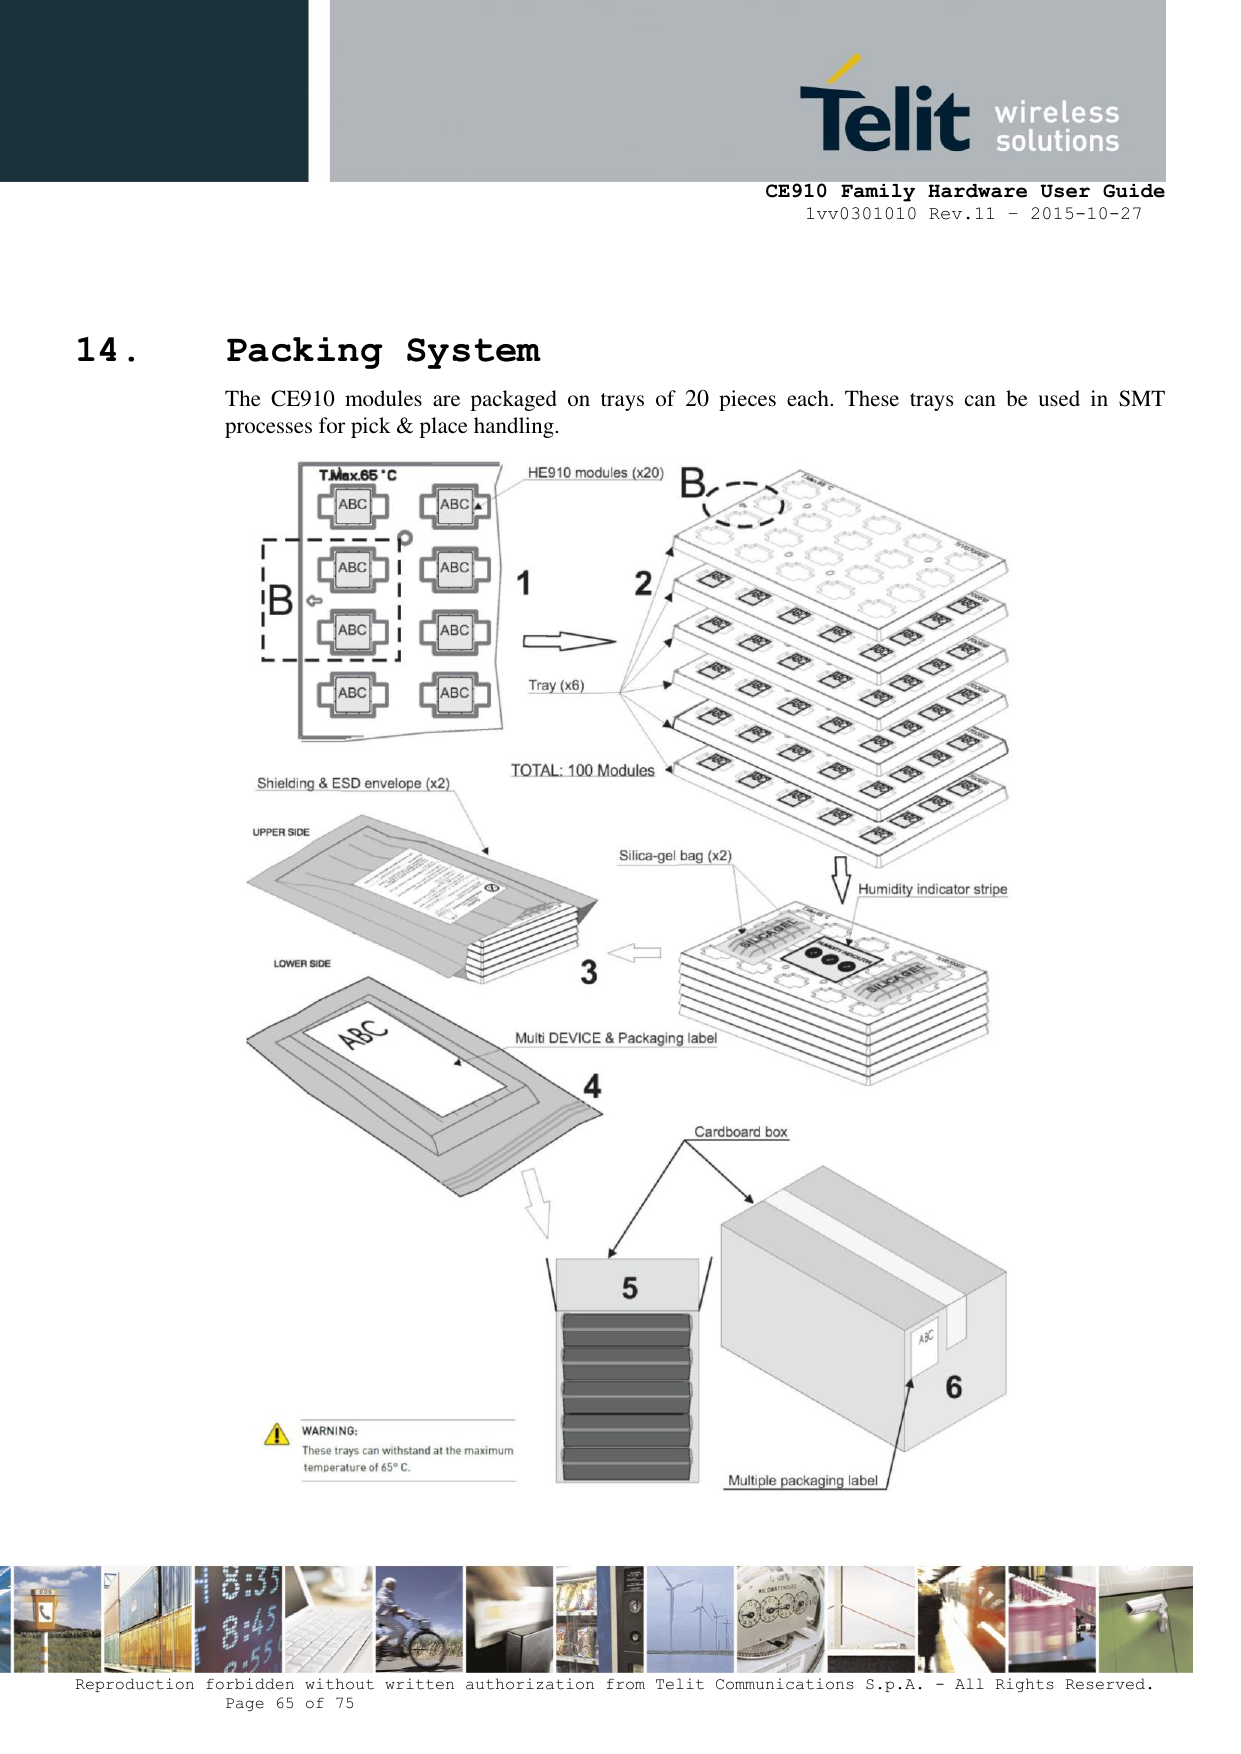     CE910 Family Hardware User Guide 1vv0301010 Rev.11 – 2015-10-27 Reproduction forbidden without written authorization from Telit Communications S.p.A. - All Rights Reserved.    Page 65 of 75                                                     14. Packing System The  CE910  modules  are  packaged  on  trays  of  20  pieces  each.  These  trays  can  be  used  in  SMT processes for pick &amp; place handling.   